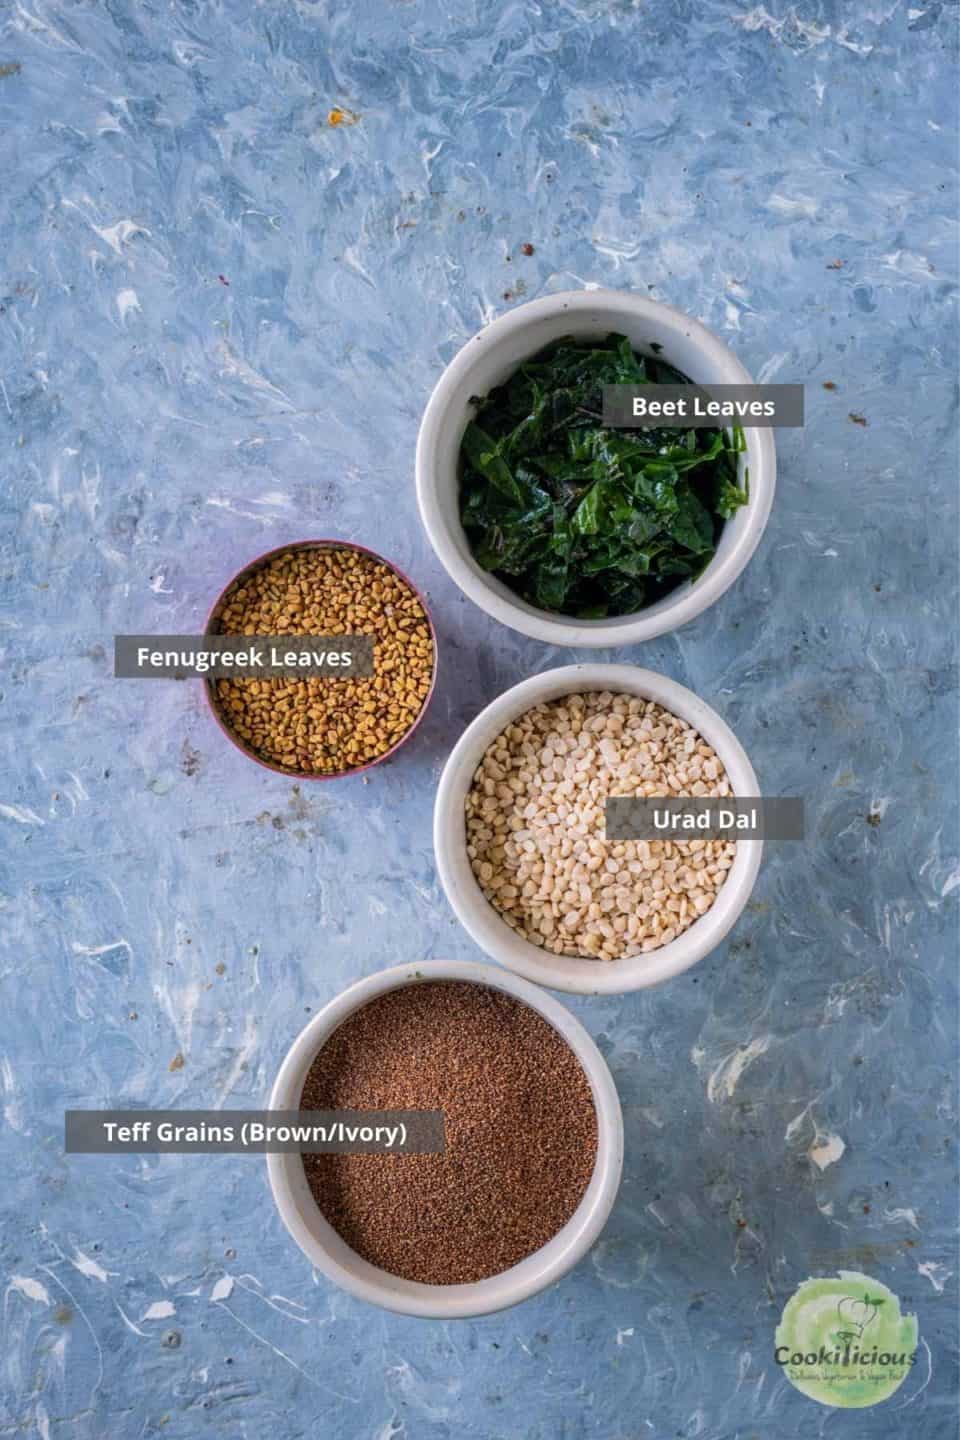 All the ingredients needed to make teff idli placed on a table with labels on them